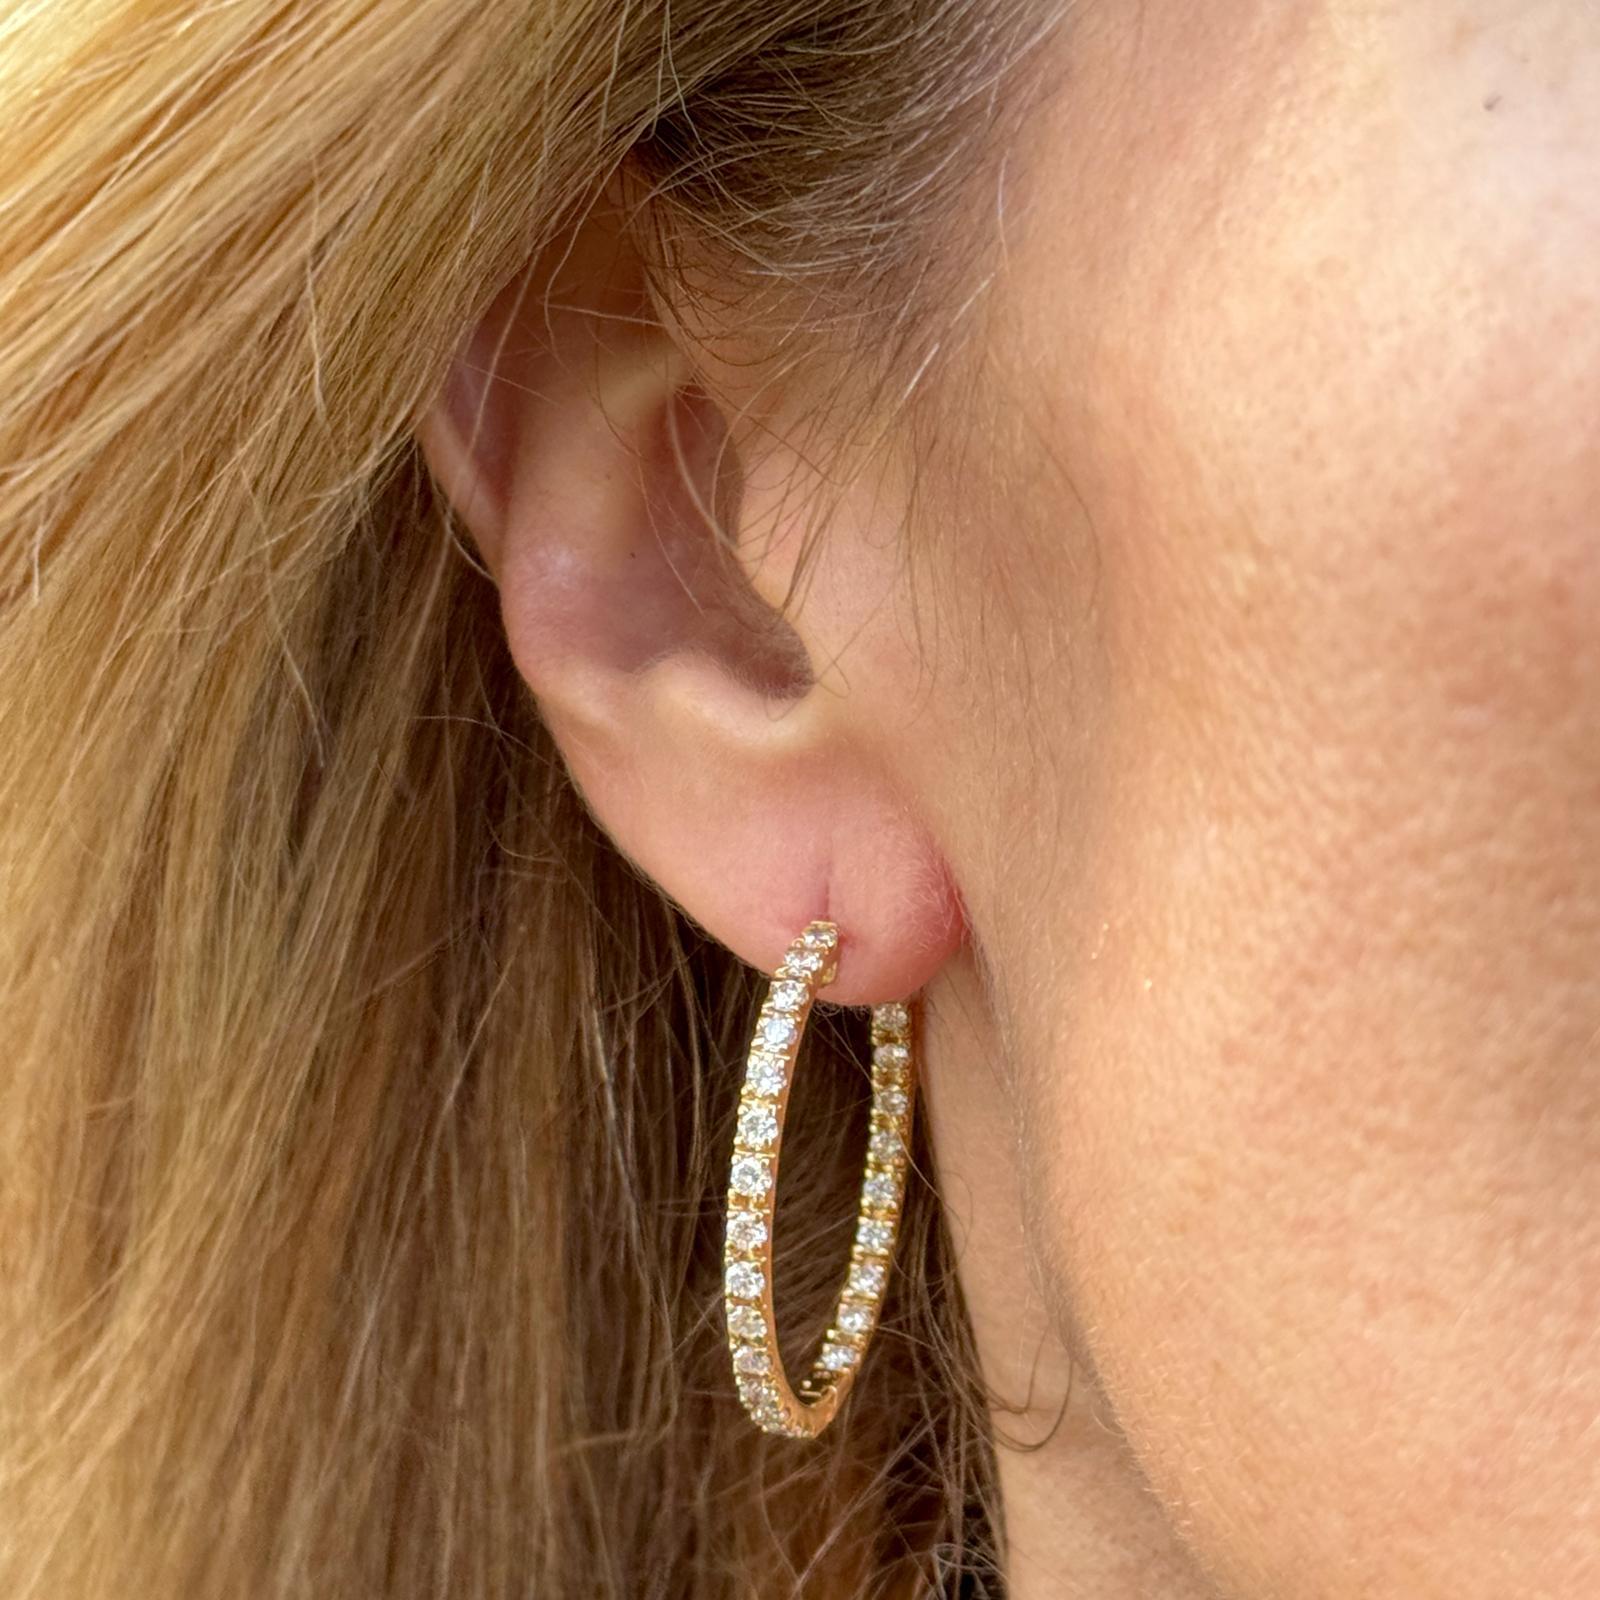 Modern diamond round in and out hoop earrings crafted in 18 karat yellow gold. The earrings feature 52 round brilliant cut diamonds weighing approximately 2.50 carat total weight and graded F-G color and VS2-SI1 clarity. The hoops measure 1.25